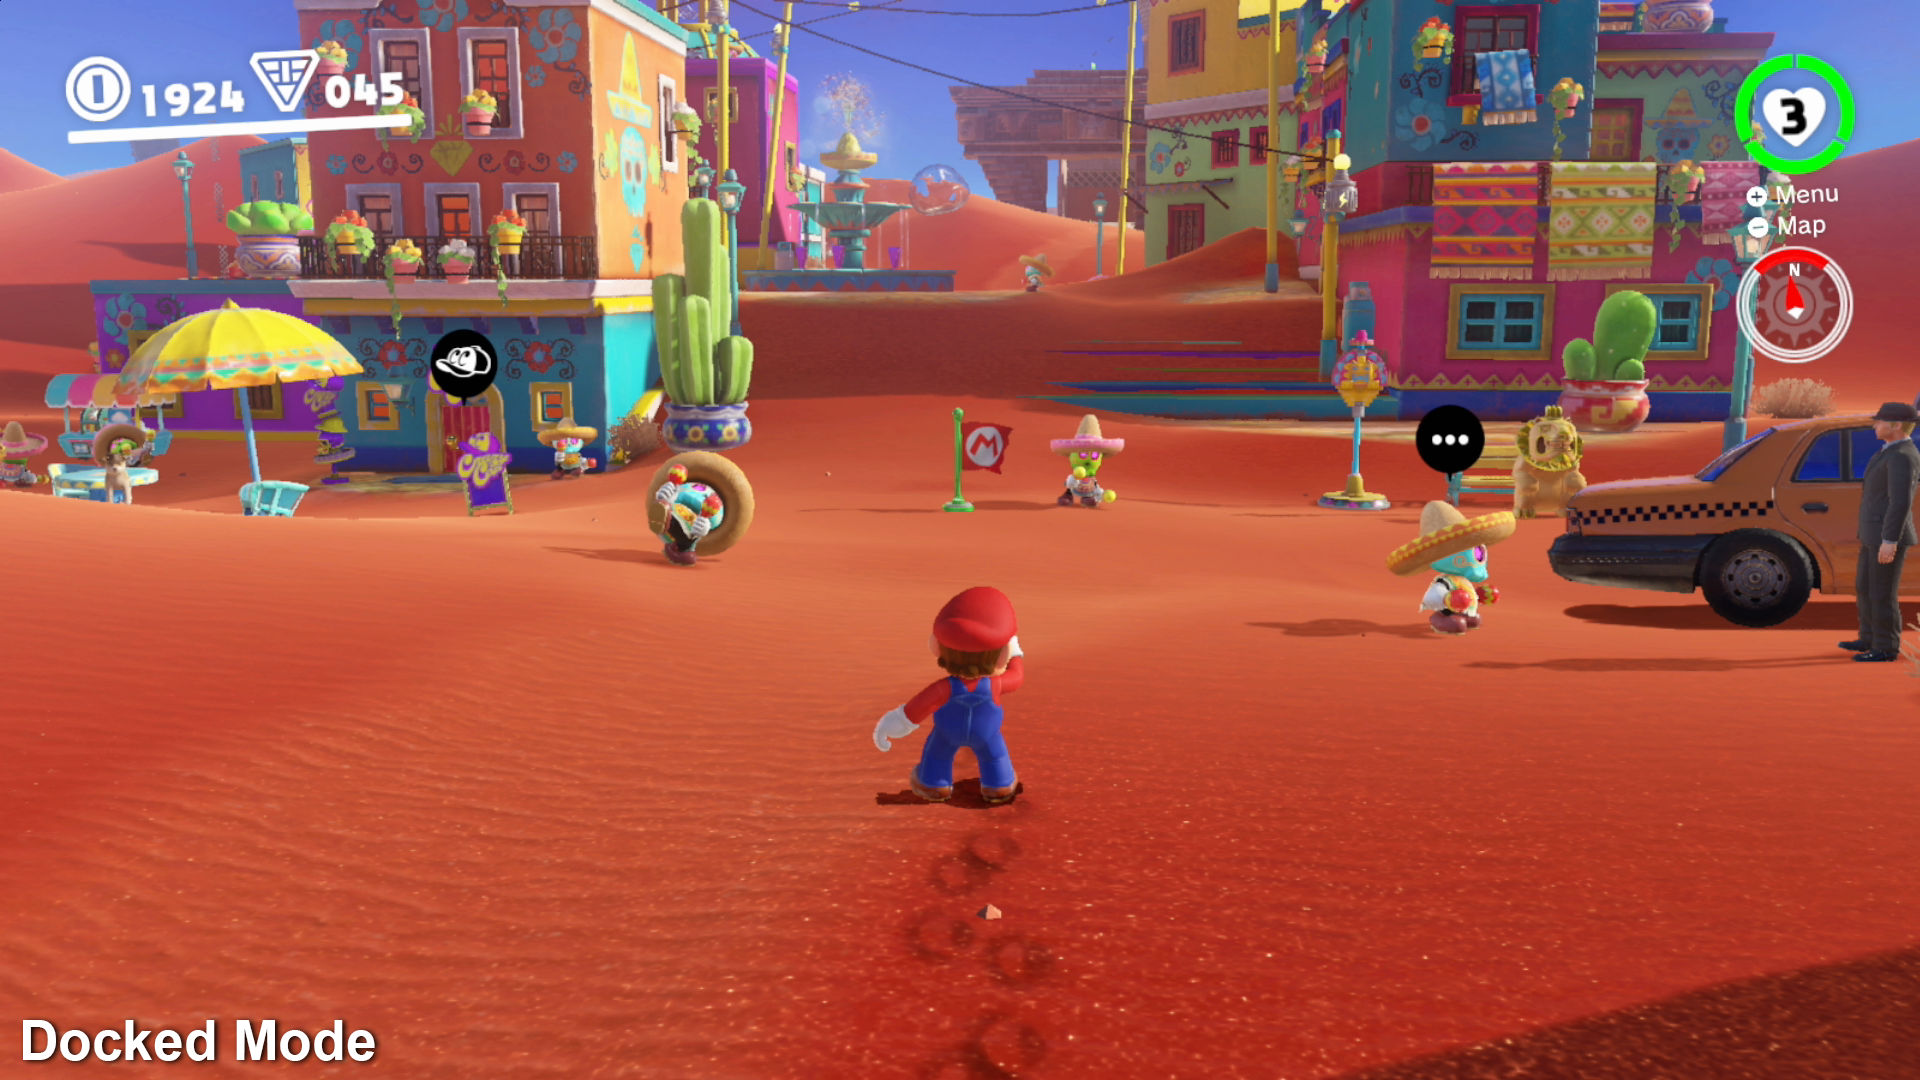 How Super Mario Odyssey pushes Switch to its limits